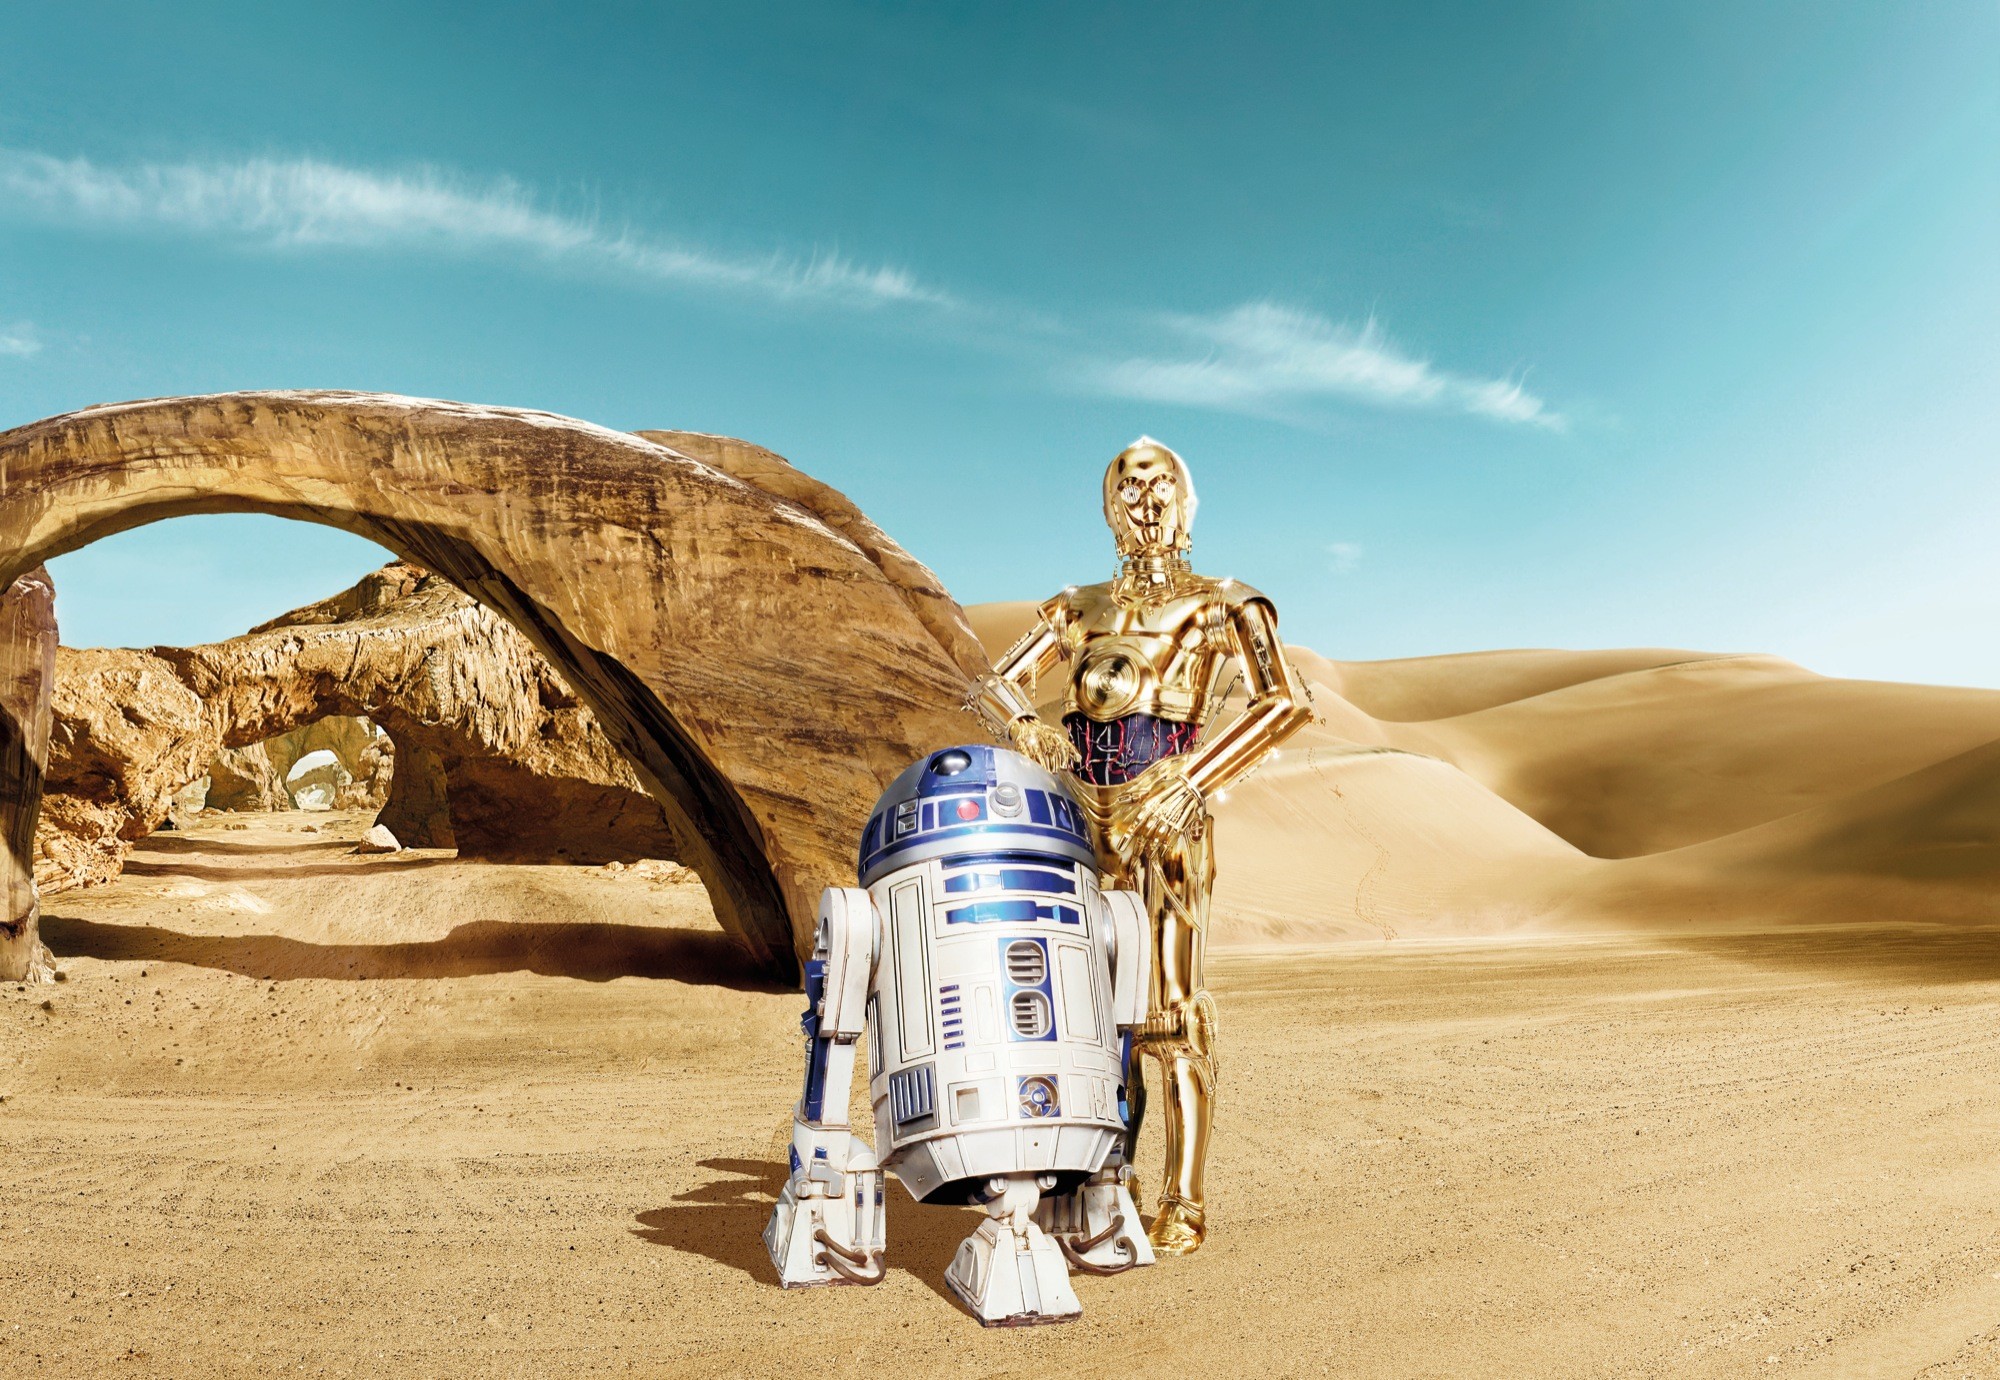 2000x1380 Explore Wallpaper Stickers, Disney Wallpaper, and more! star wars r2d2 and  c3po ...